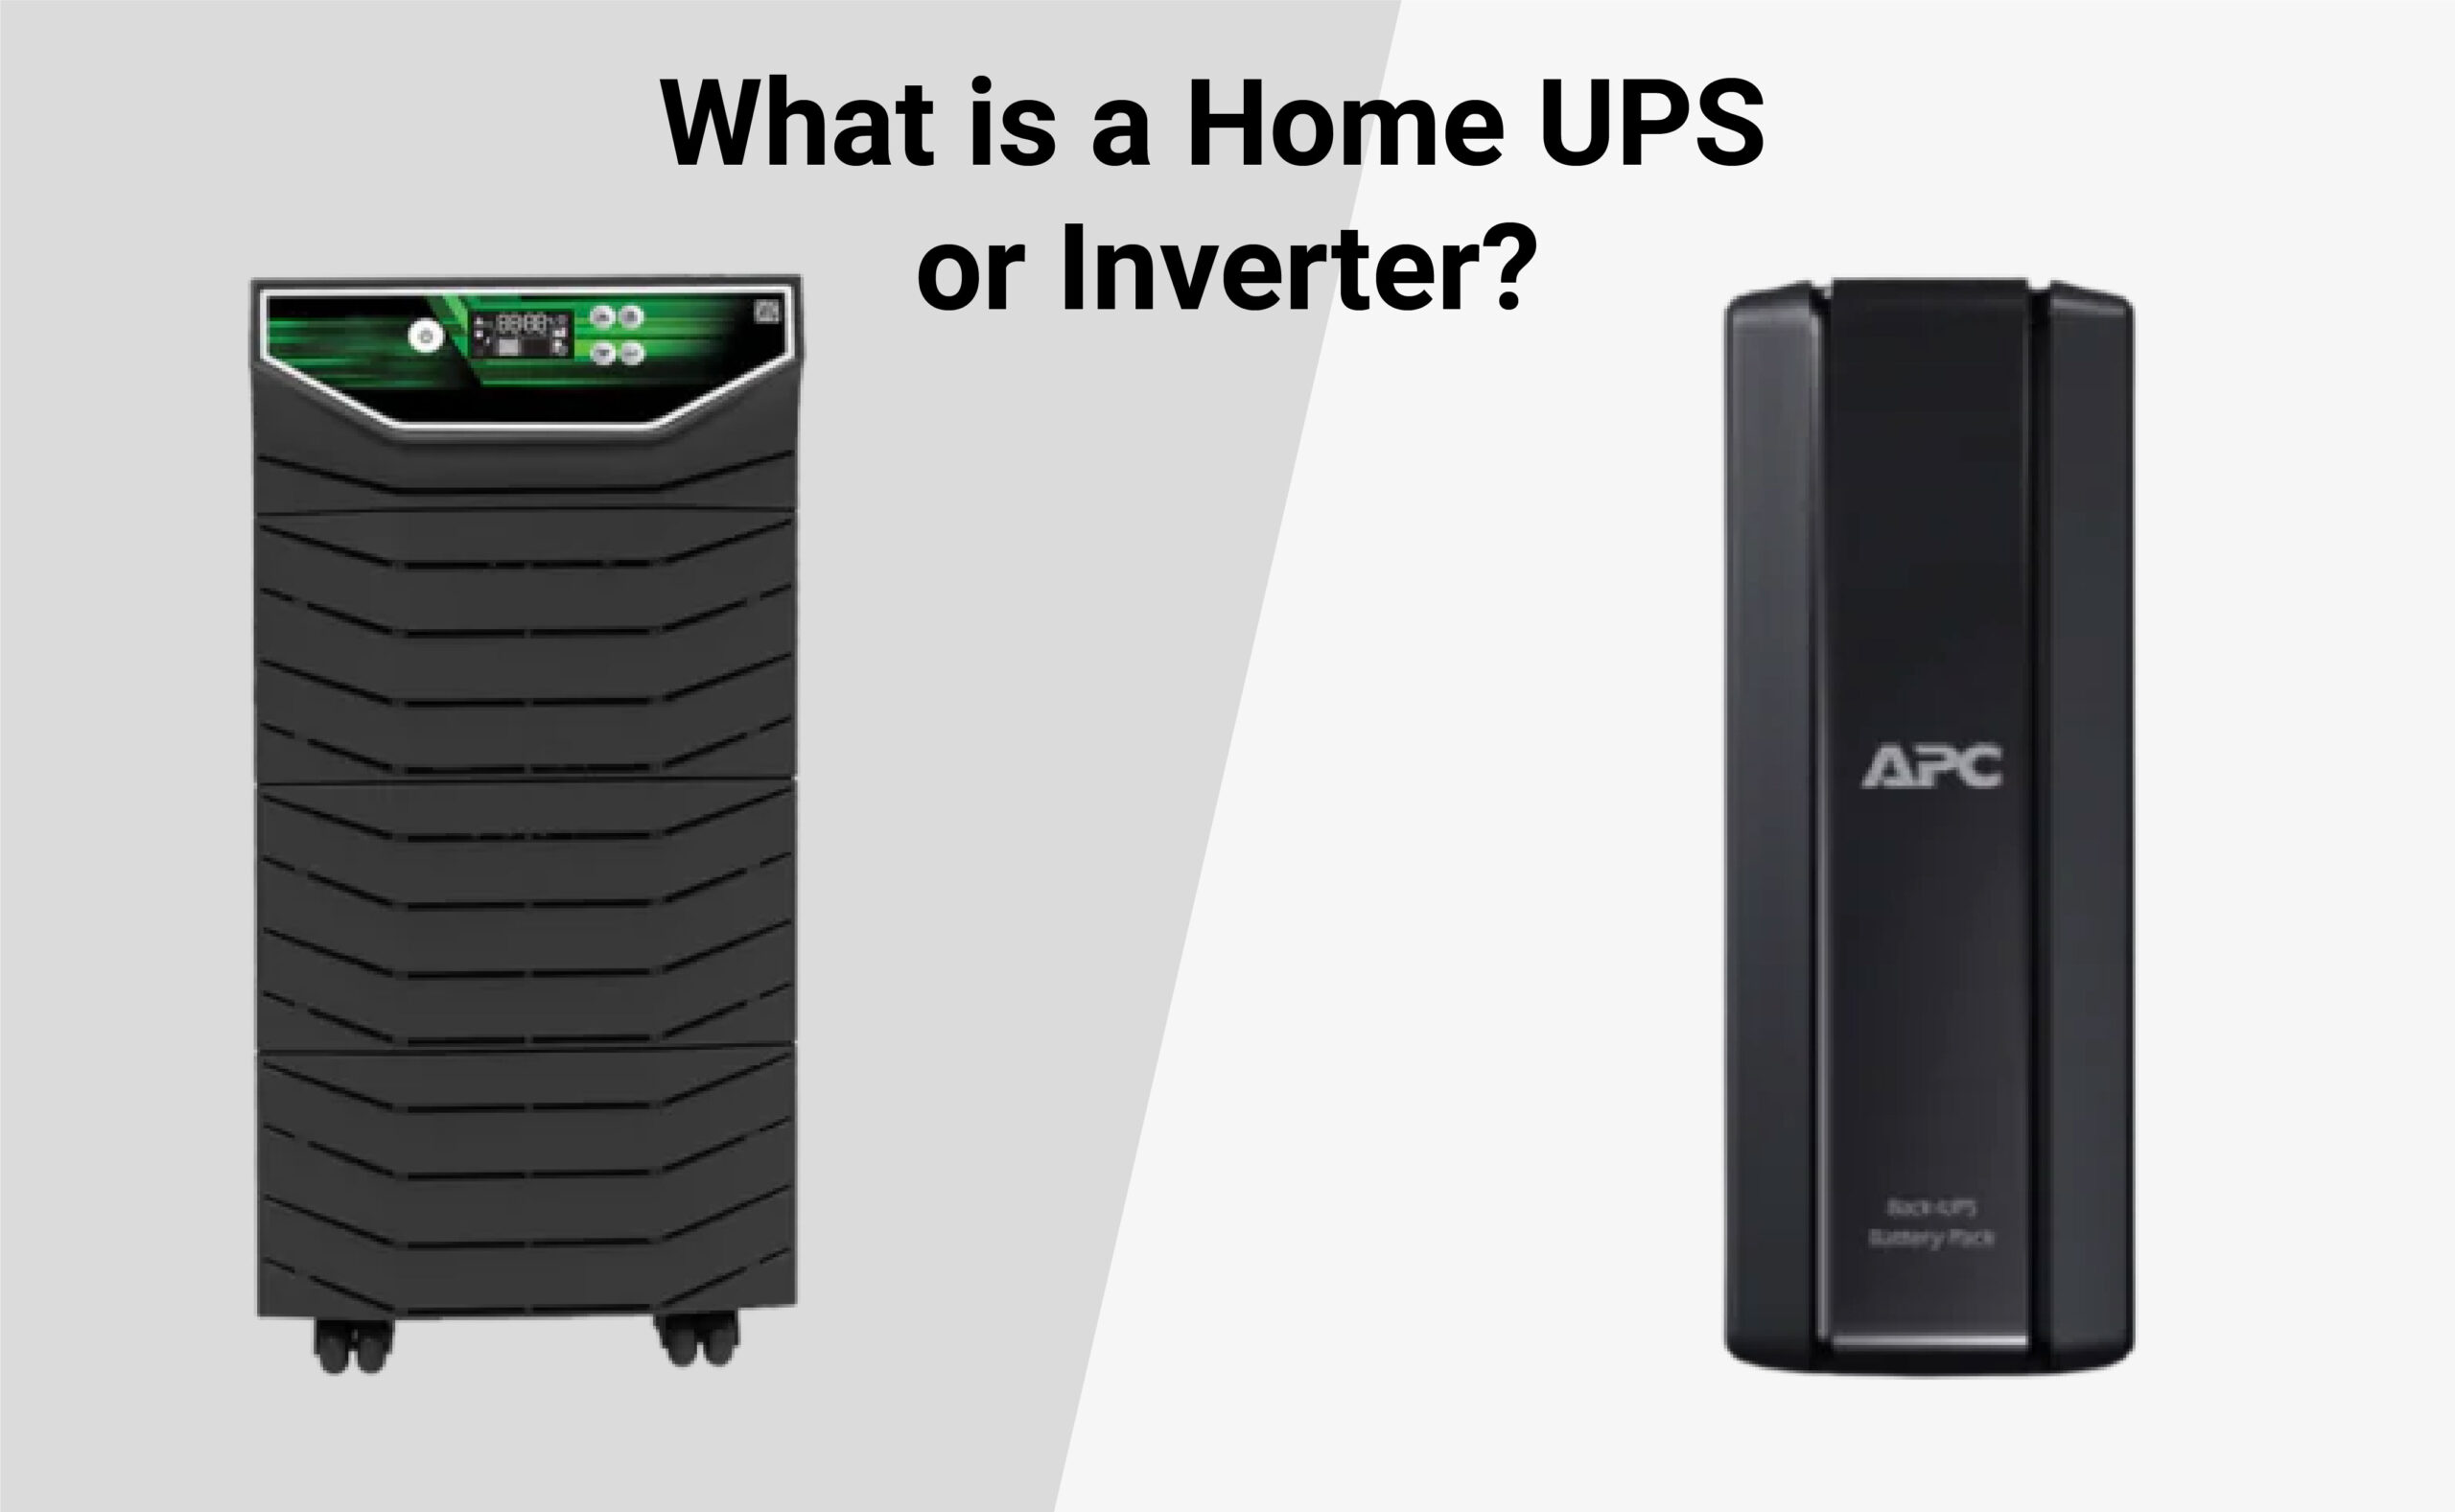 What is a Home UPS or Inverter?